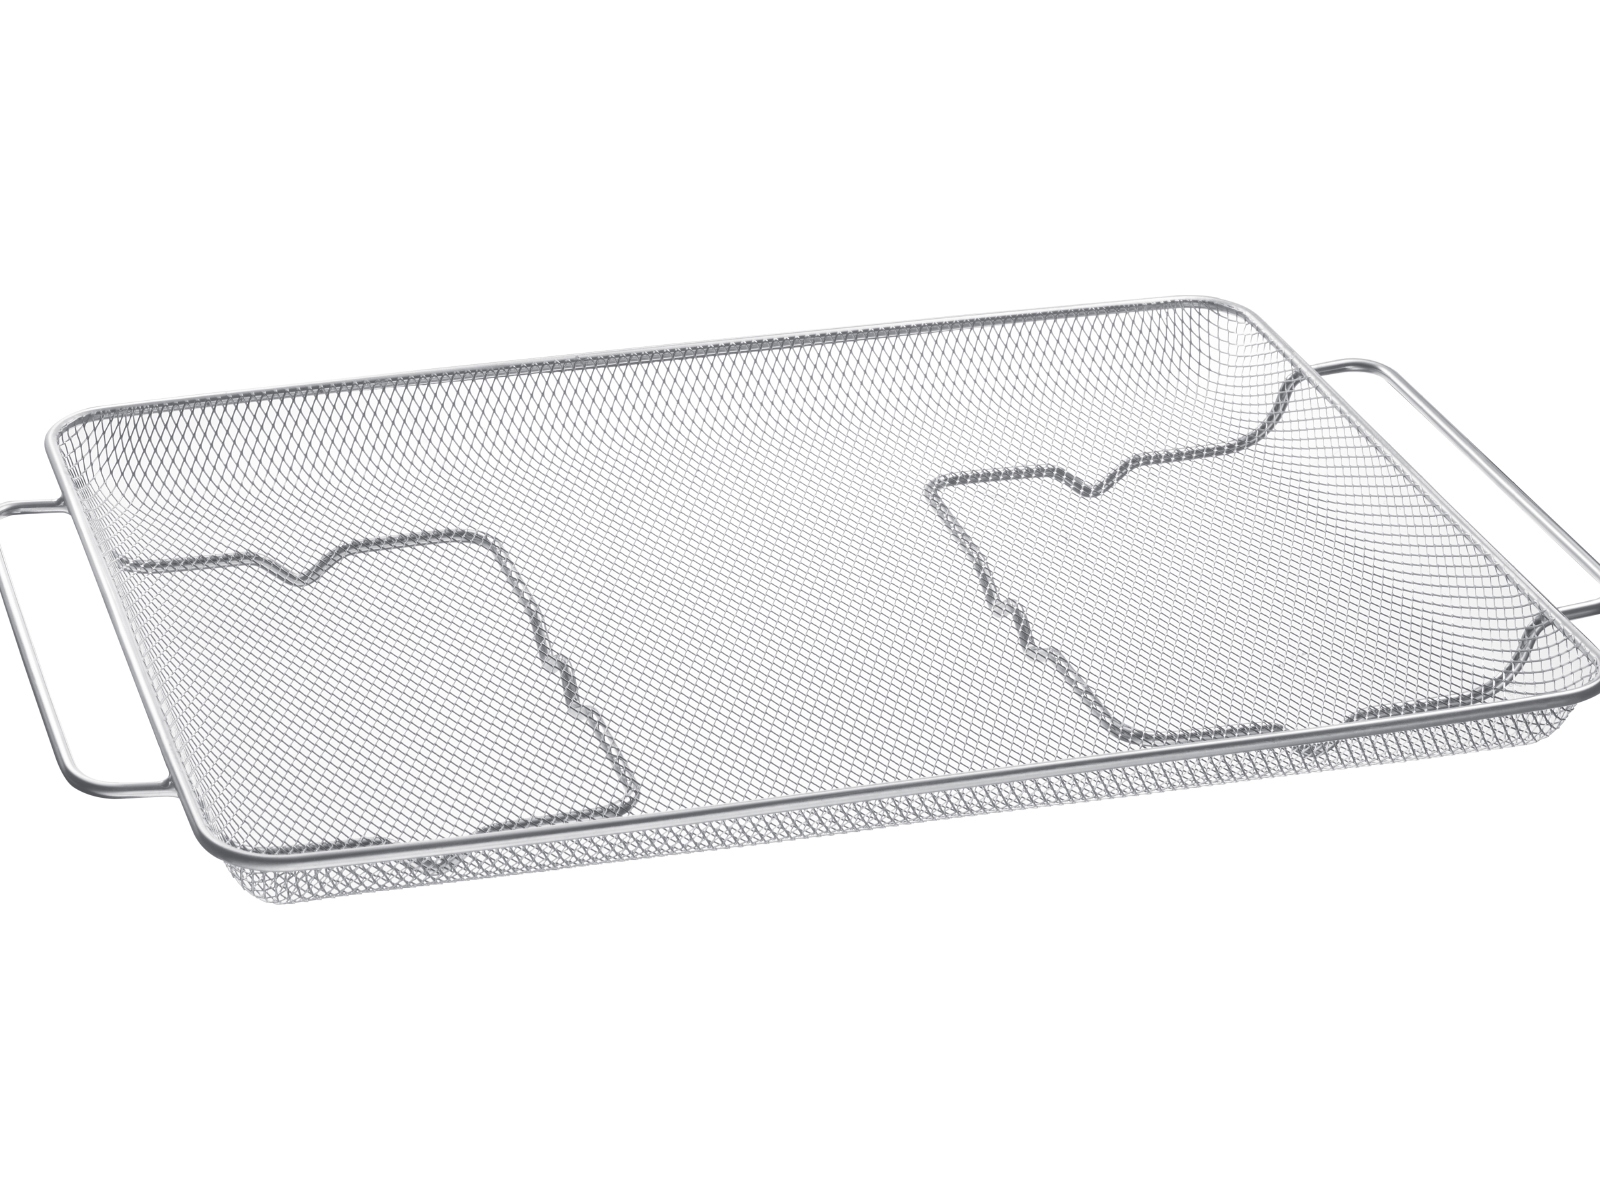 Samsung Stainless Steel Air Fry Tray